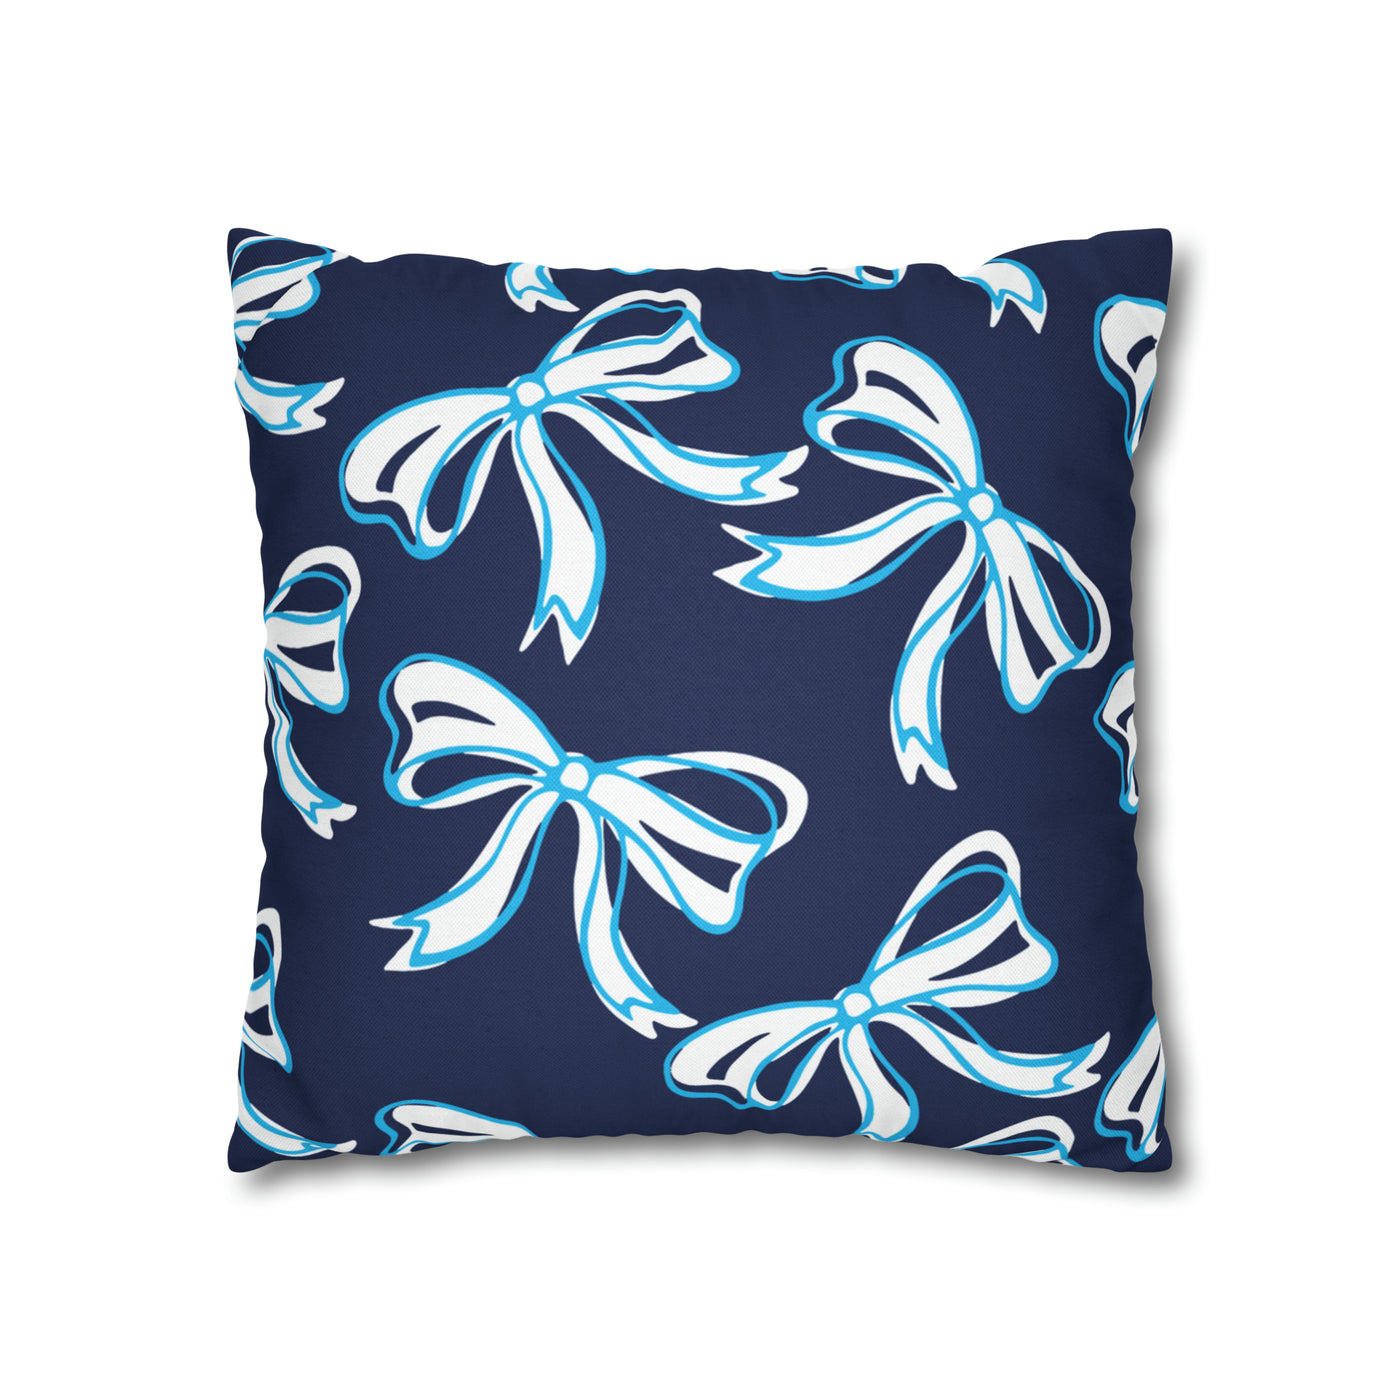 Trendy Bow College Pillow Cover - Dorm Pillow, Graduation Gift,Bed Party Gift,Acceptance Gift,College Gift, VIllanova, Penn State, UConn